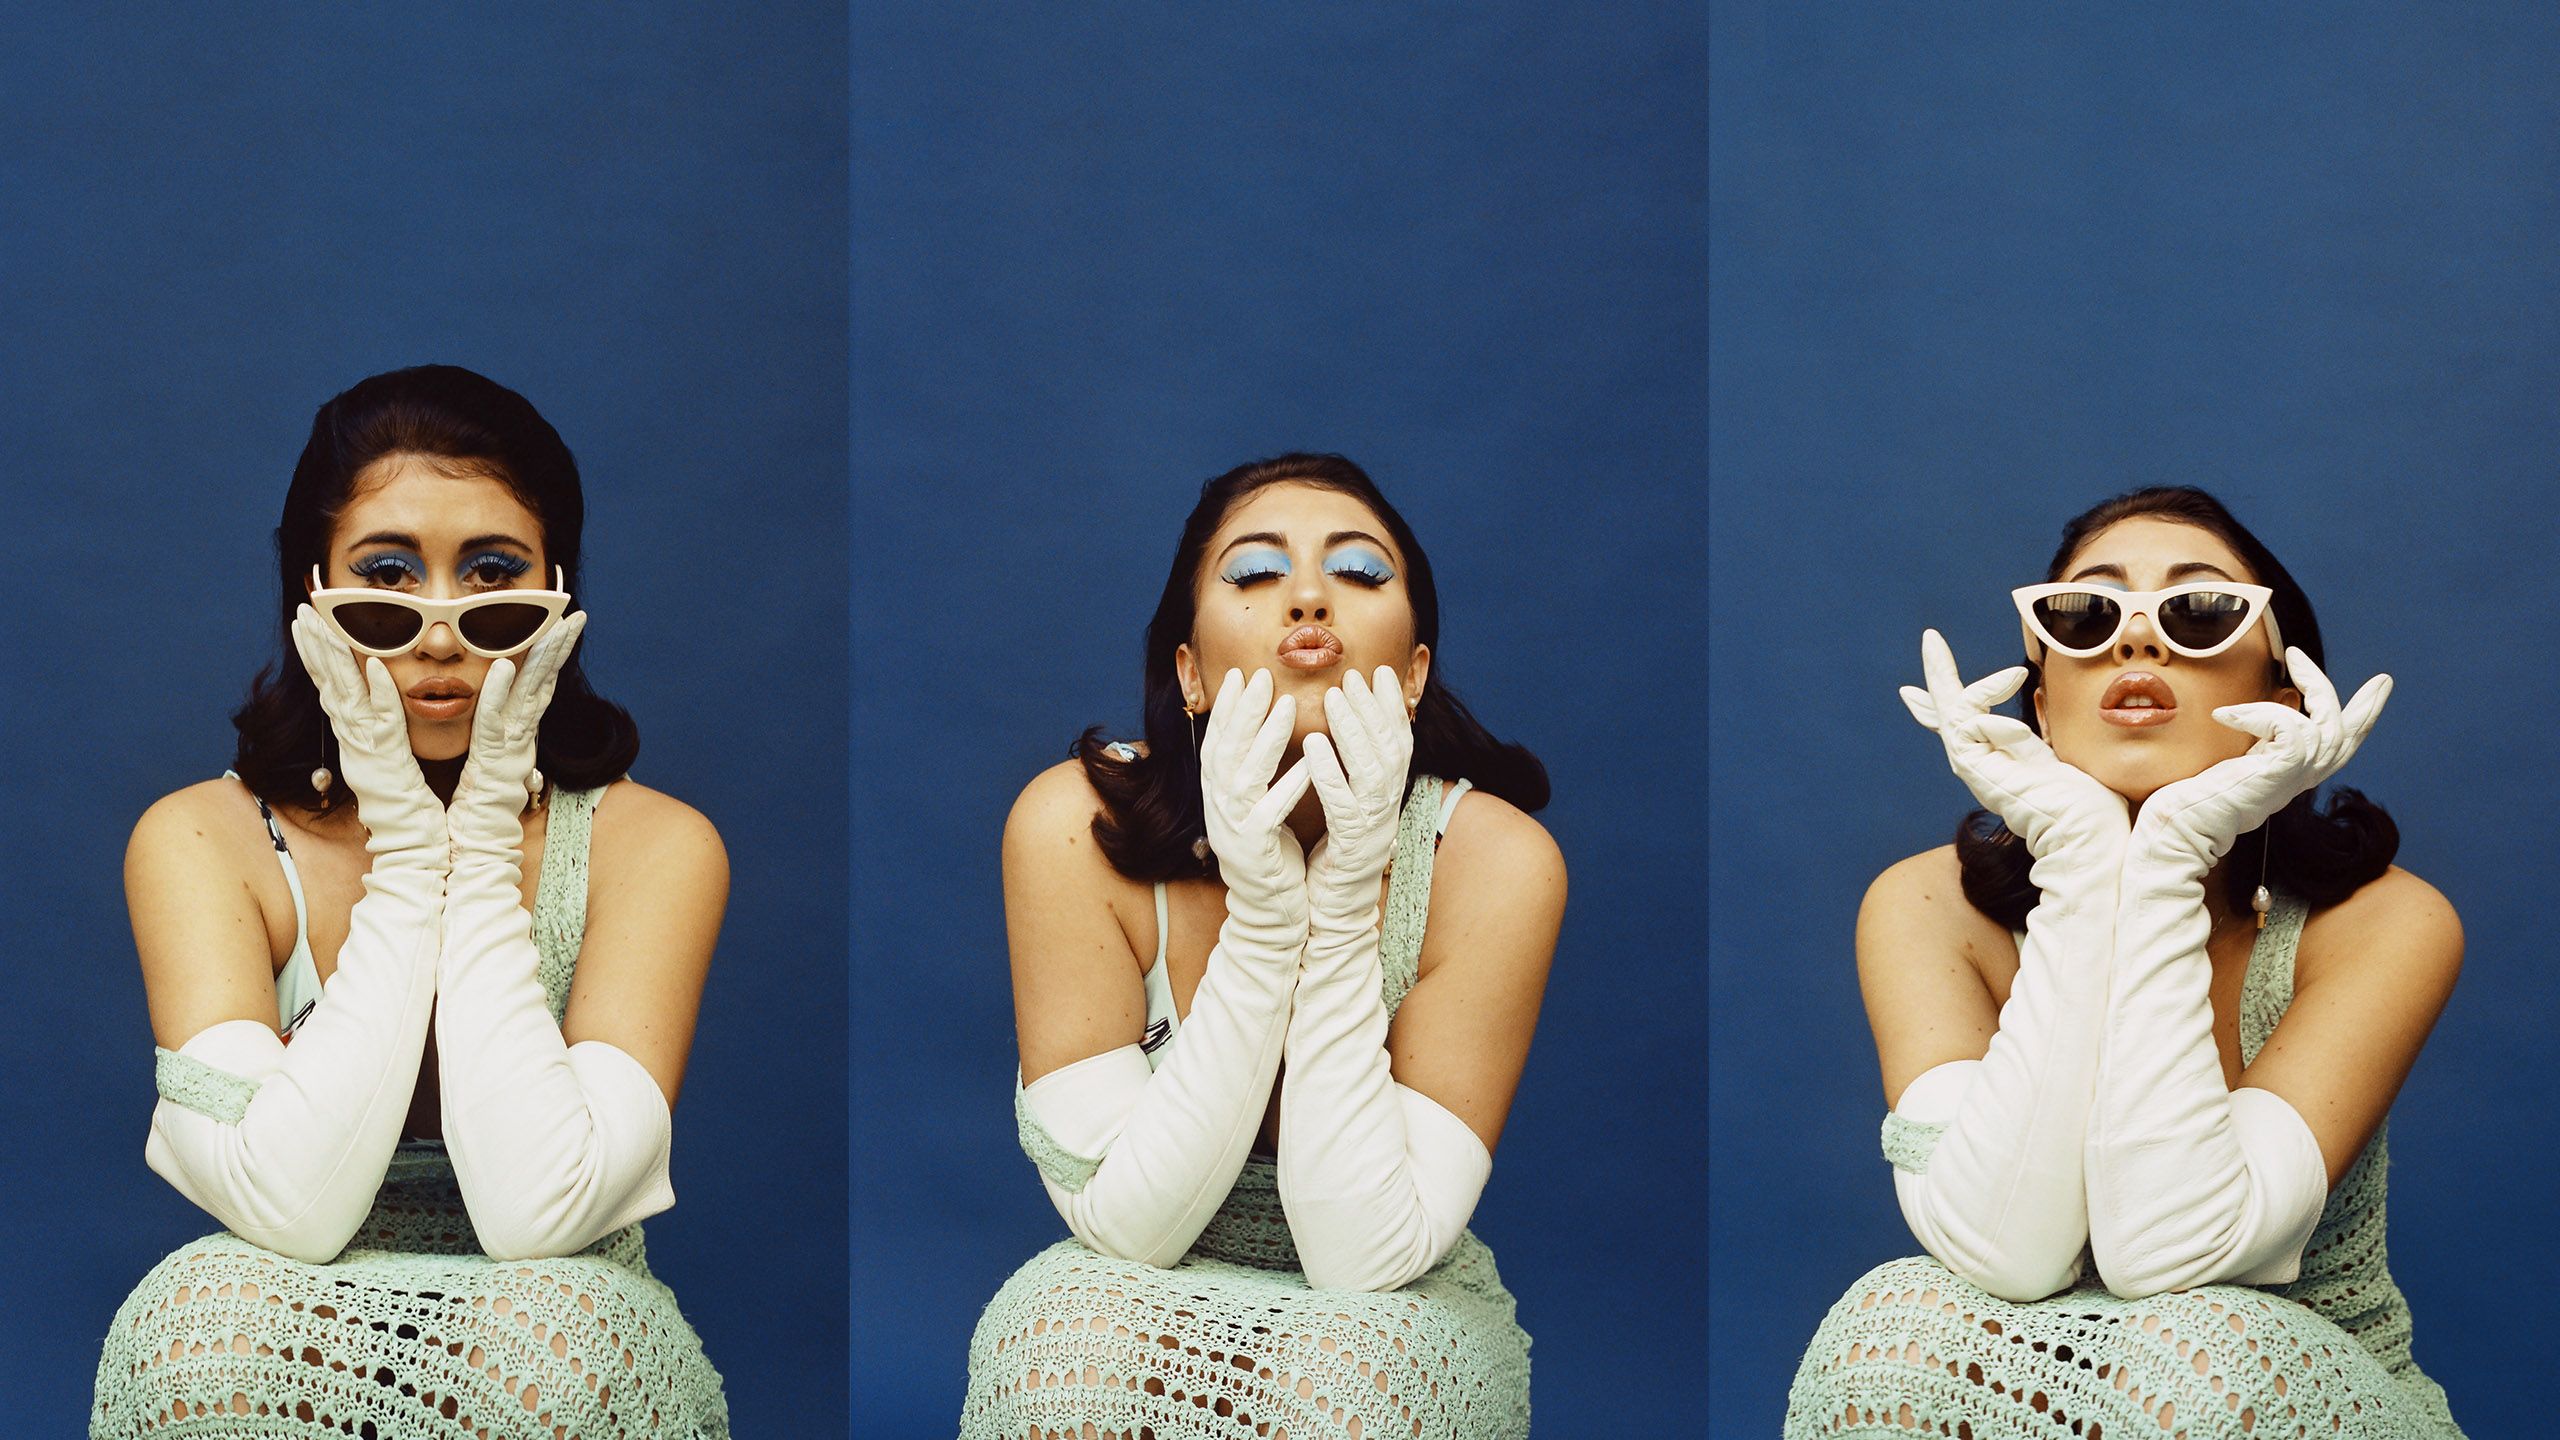 A triptych of a woman wearing white gloves and sunglasses blowing a kiss - Kali Uchis